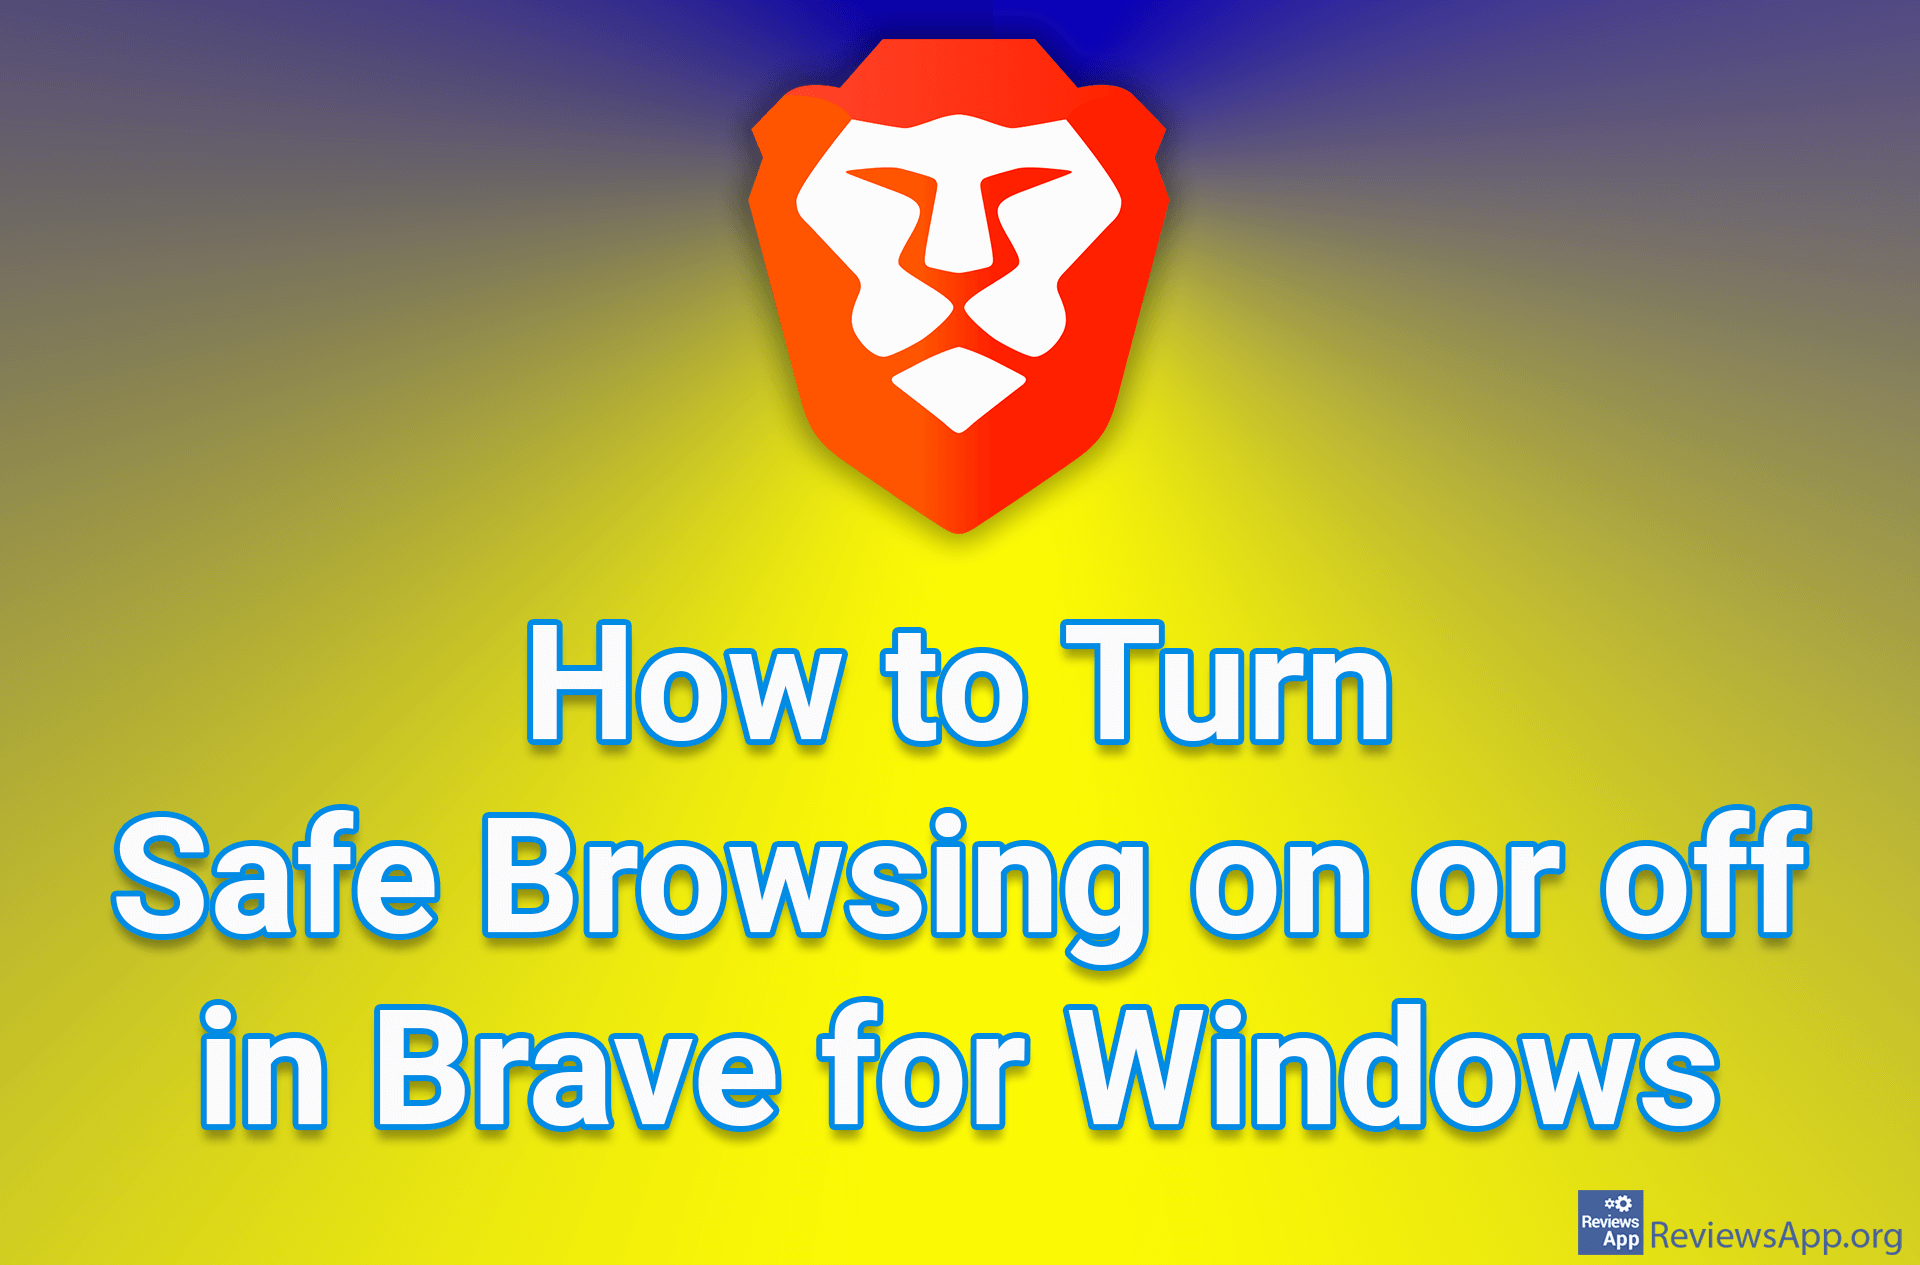 How to Turn Safe Browsing on or off in Brave for Windows